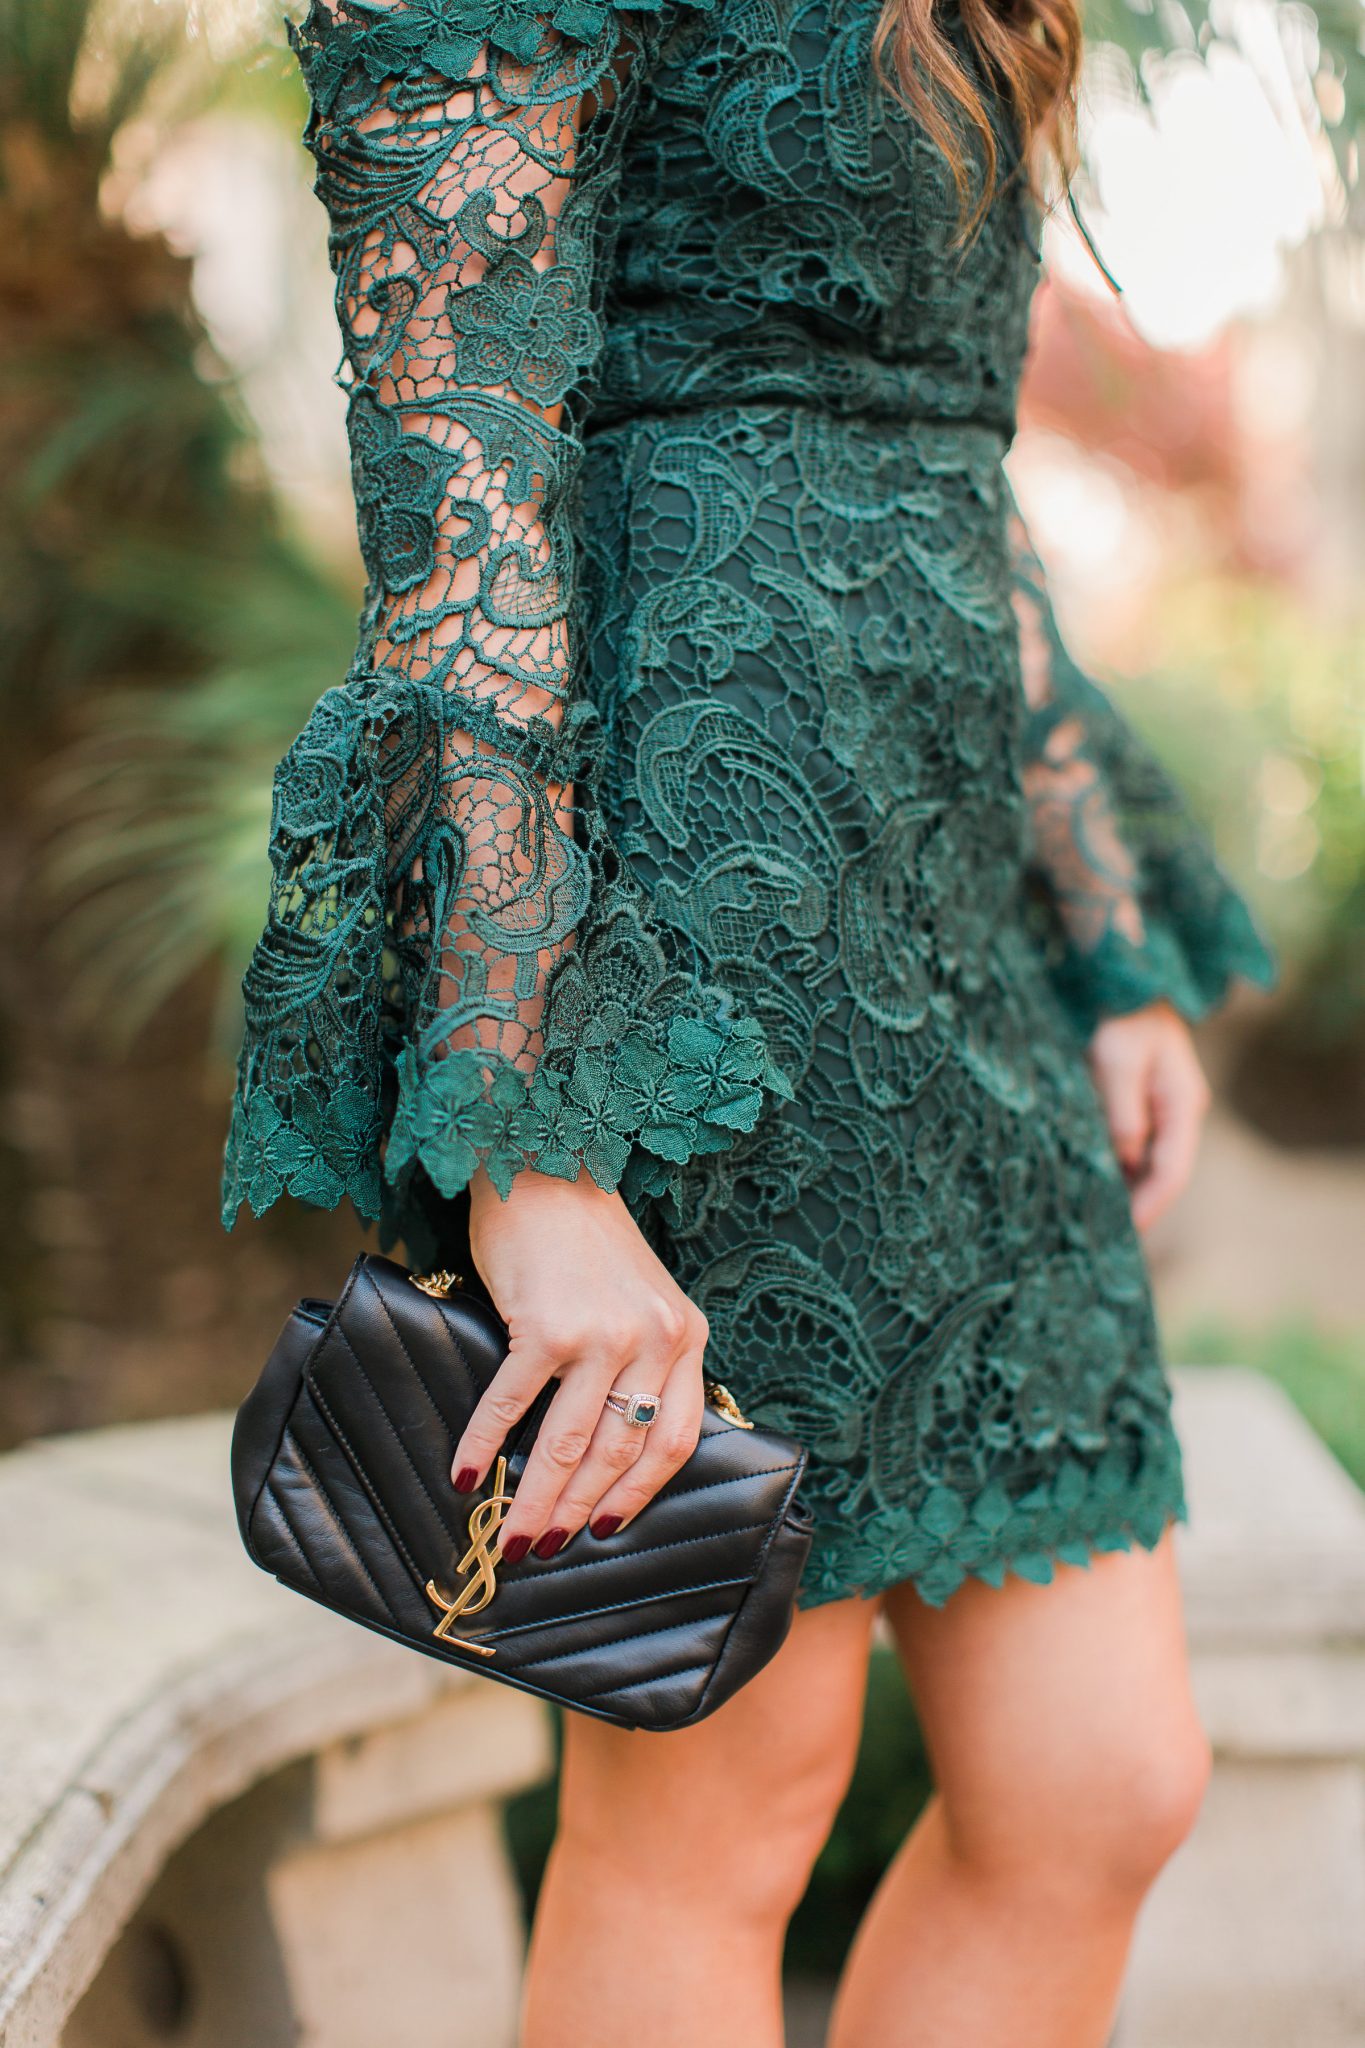 Maxie Elle | Lace emerald off the shoulder dress and YSL bag - The Best NYE Dresses by popular Orange County style blogger Maxie Elle